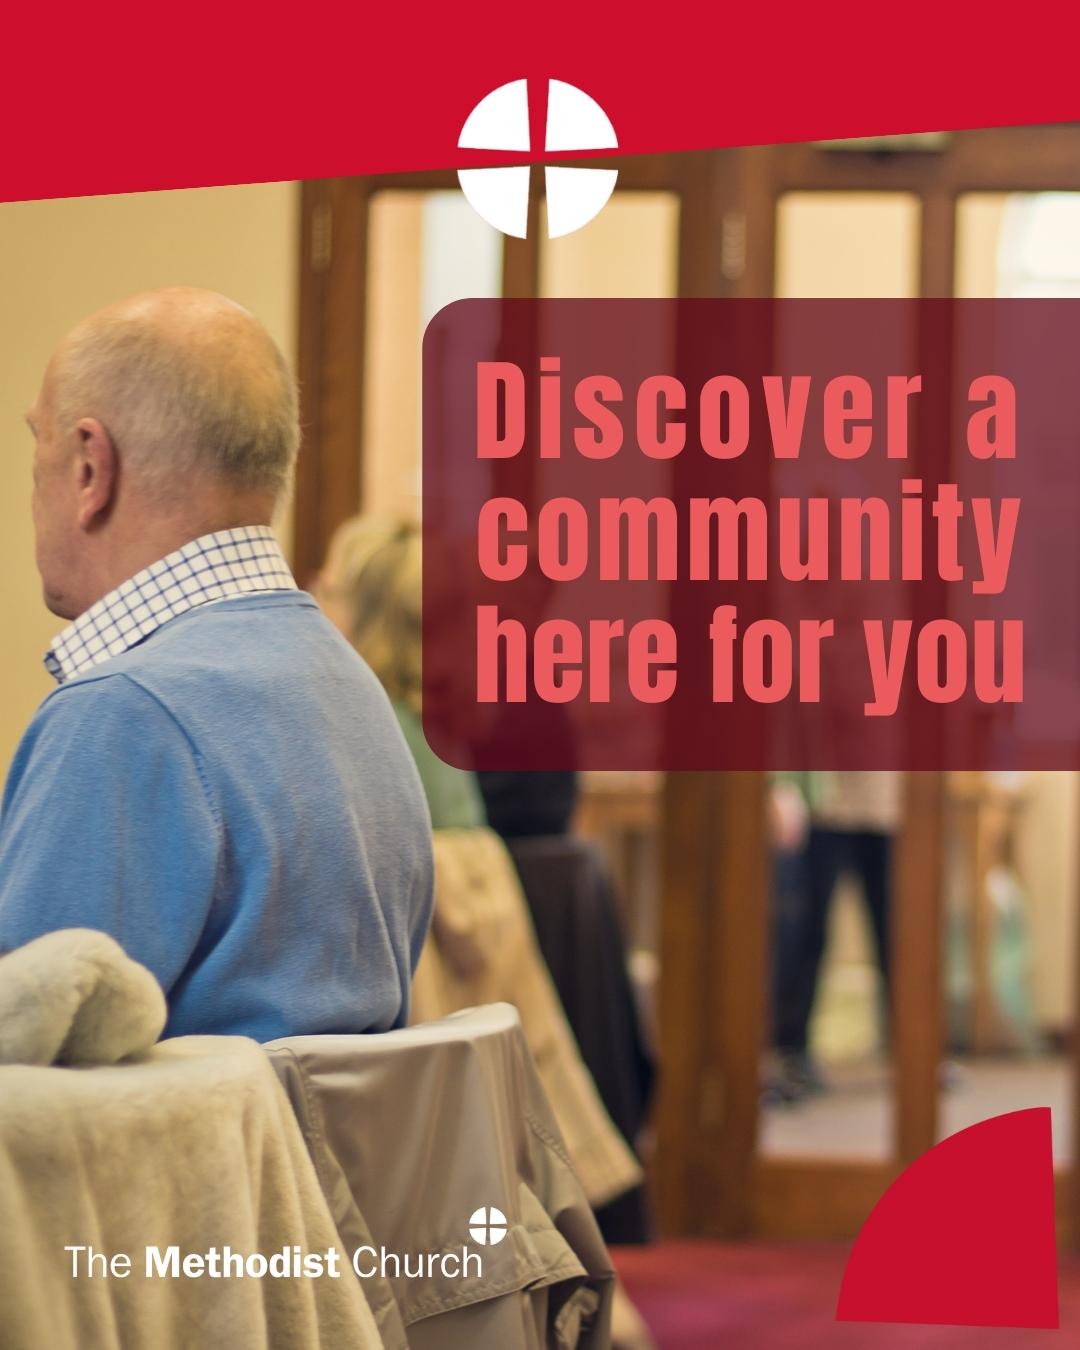 Discover a community here for you